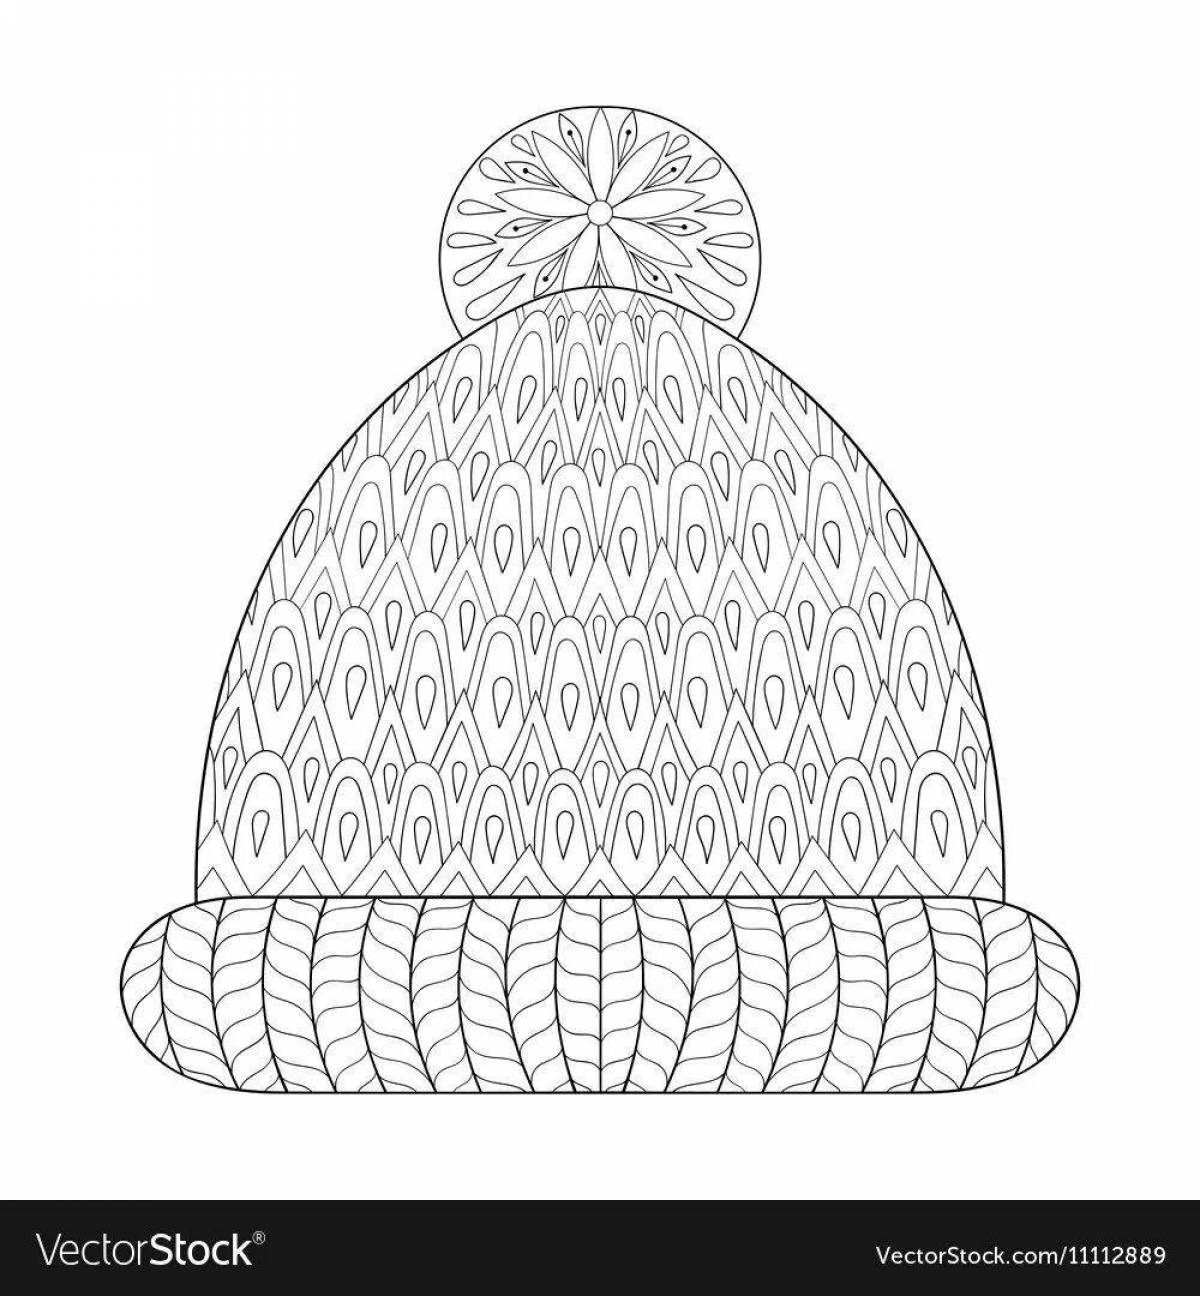 Coloring page joyful hat and gloves